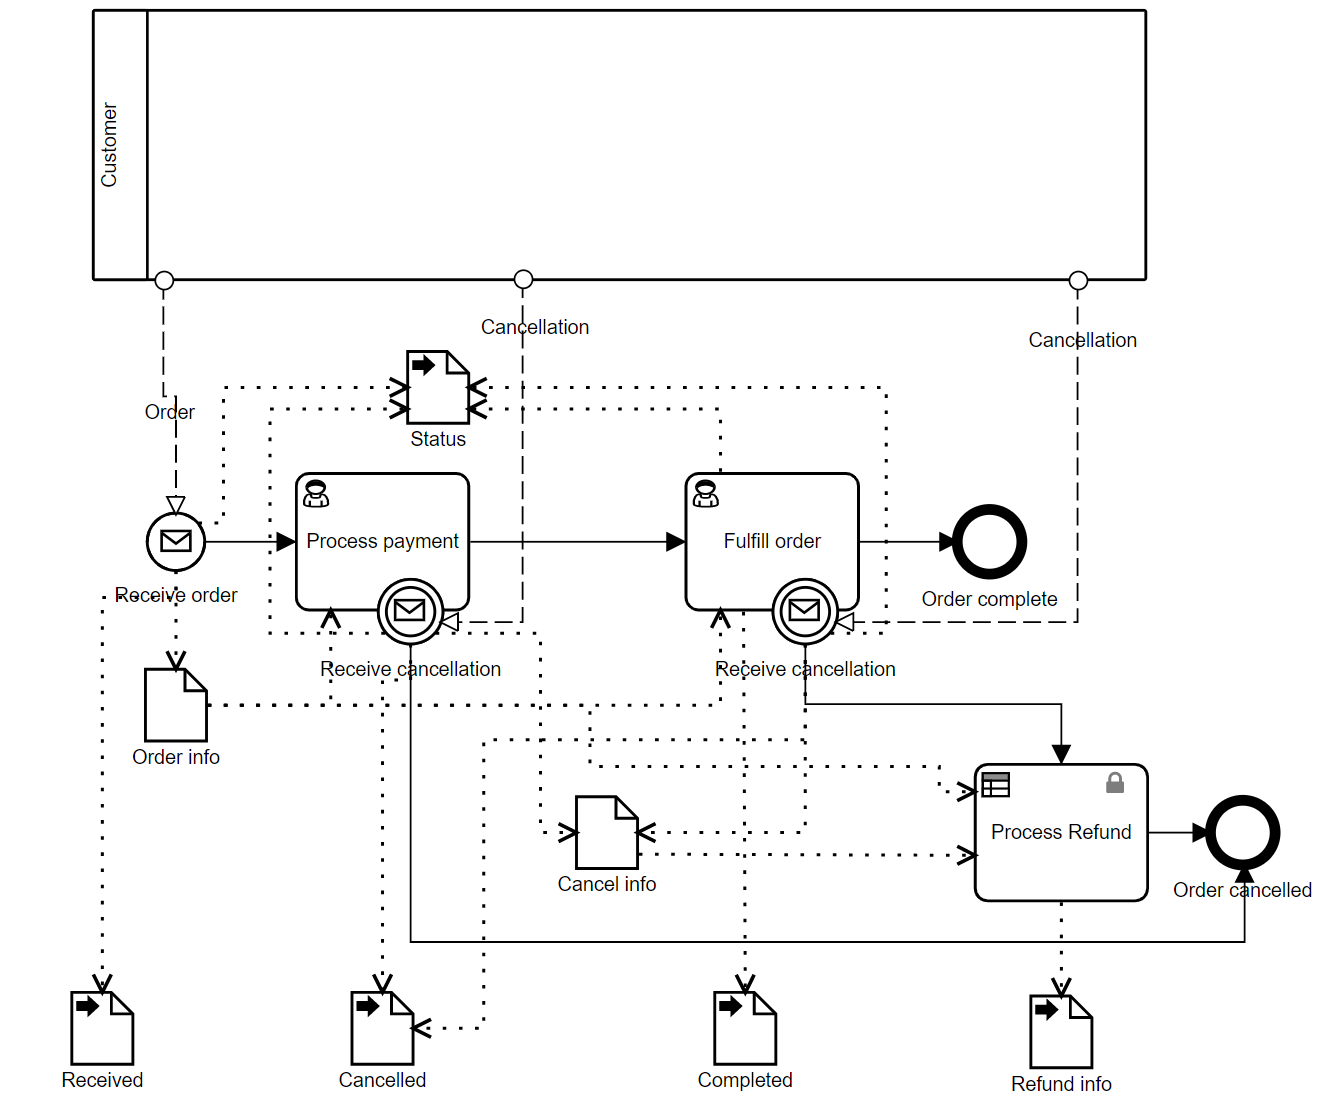 Bruce Silver's Blog - Using Messages in Executable BPMN